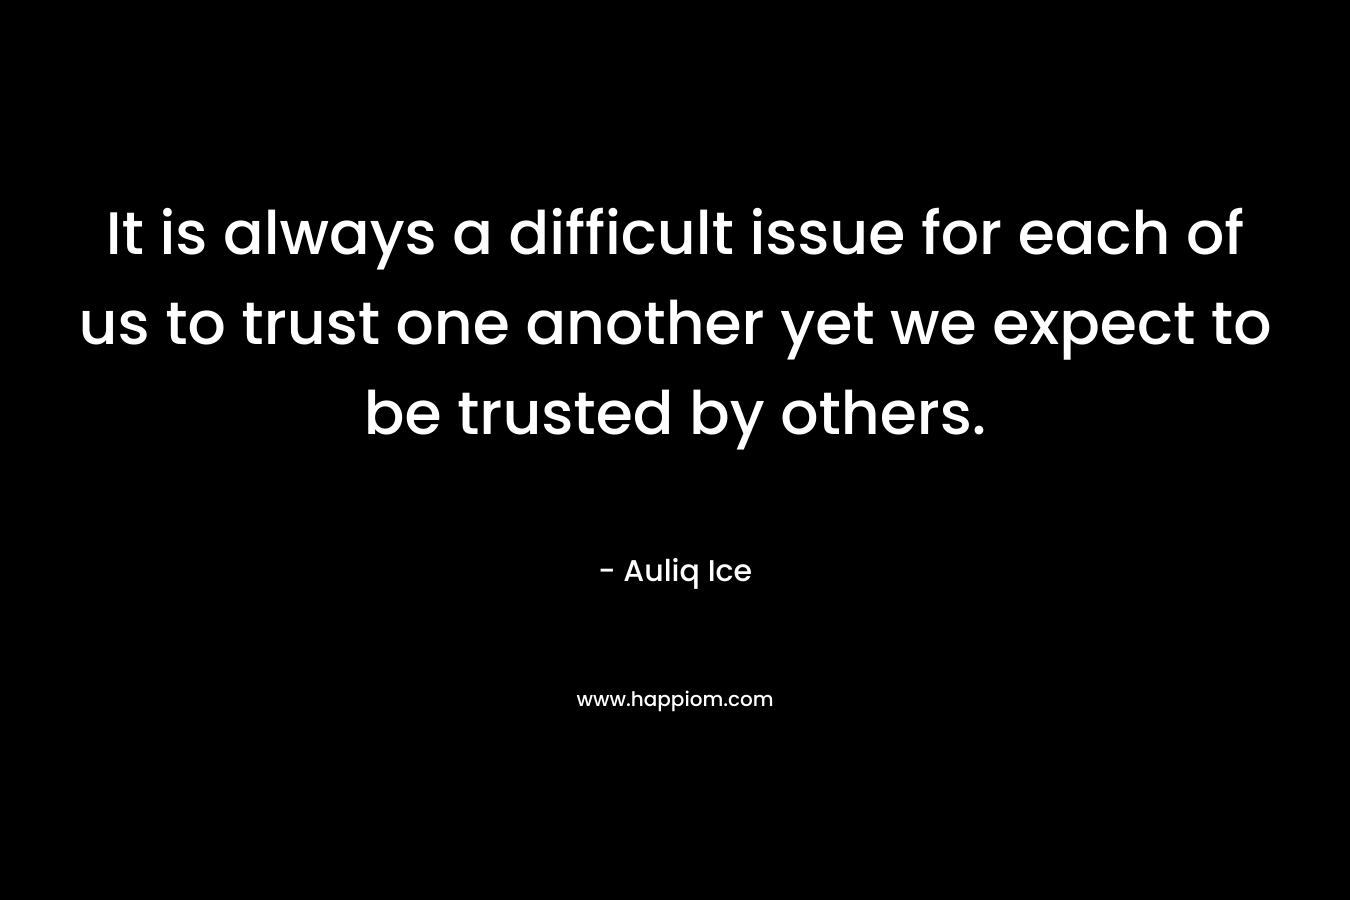 It is always a difficult issue for each of us to trust one another yet we expect to be trusted by others.